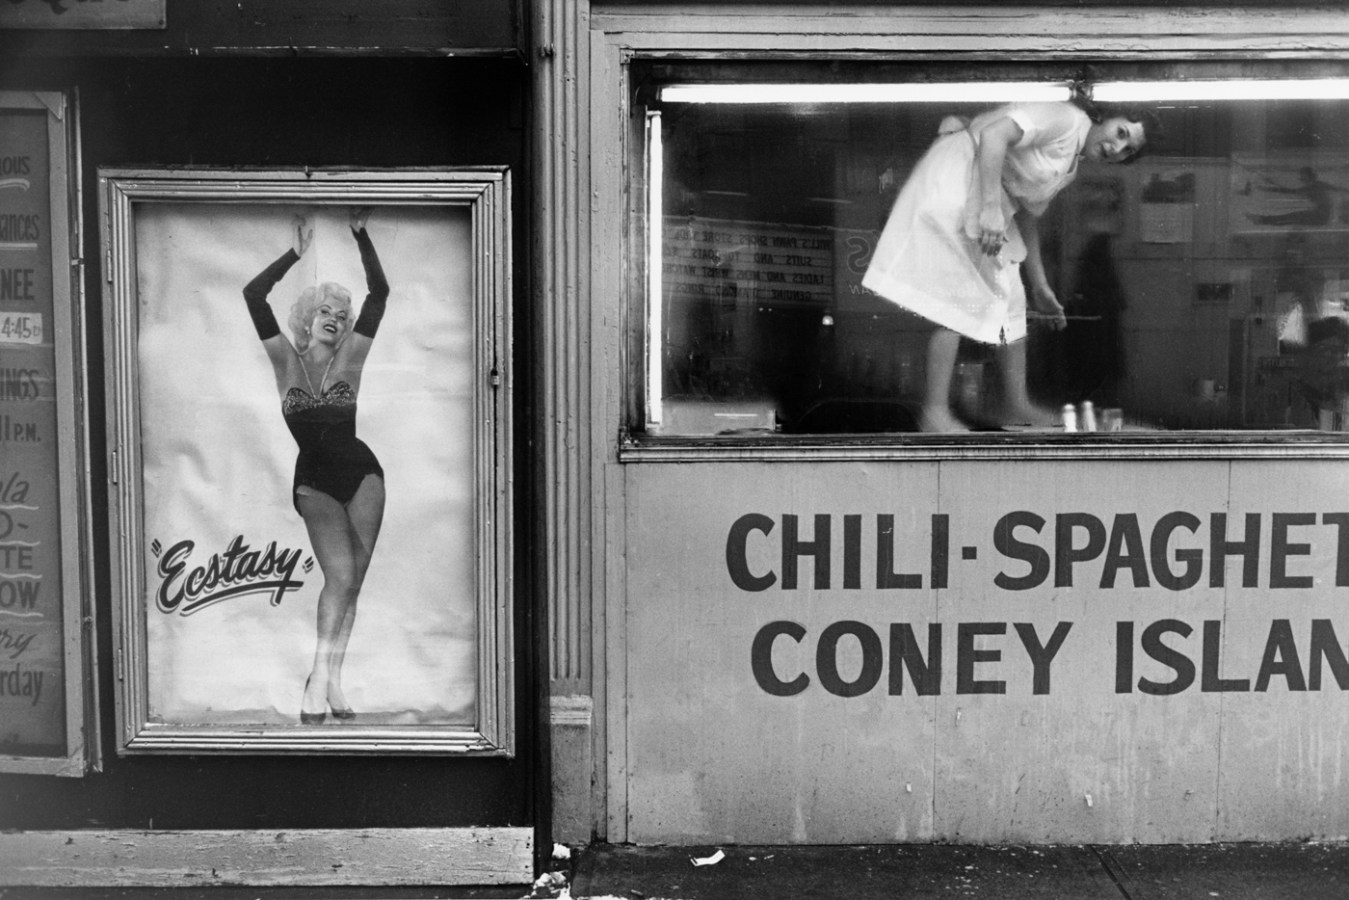 Black and white photograph of building exterior depicting a movie poster and waitress standing on table looking outward